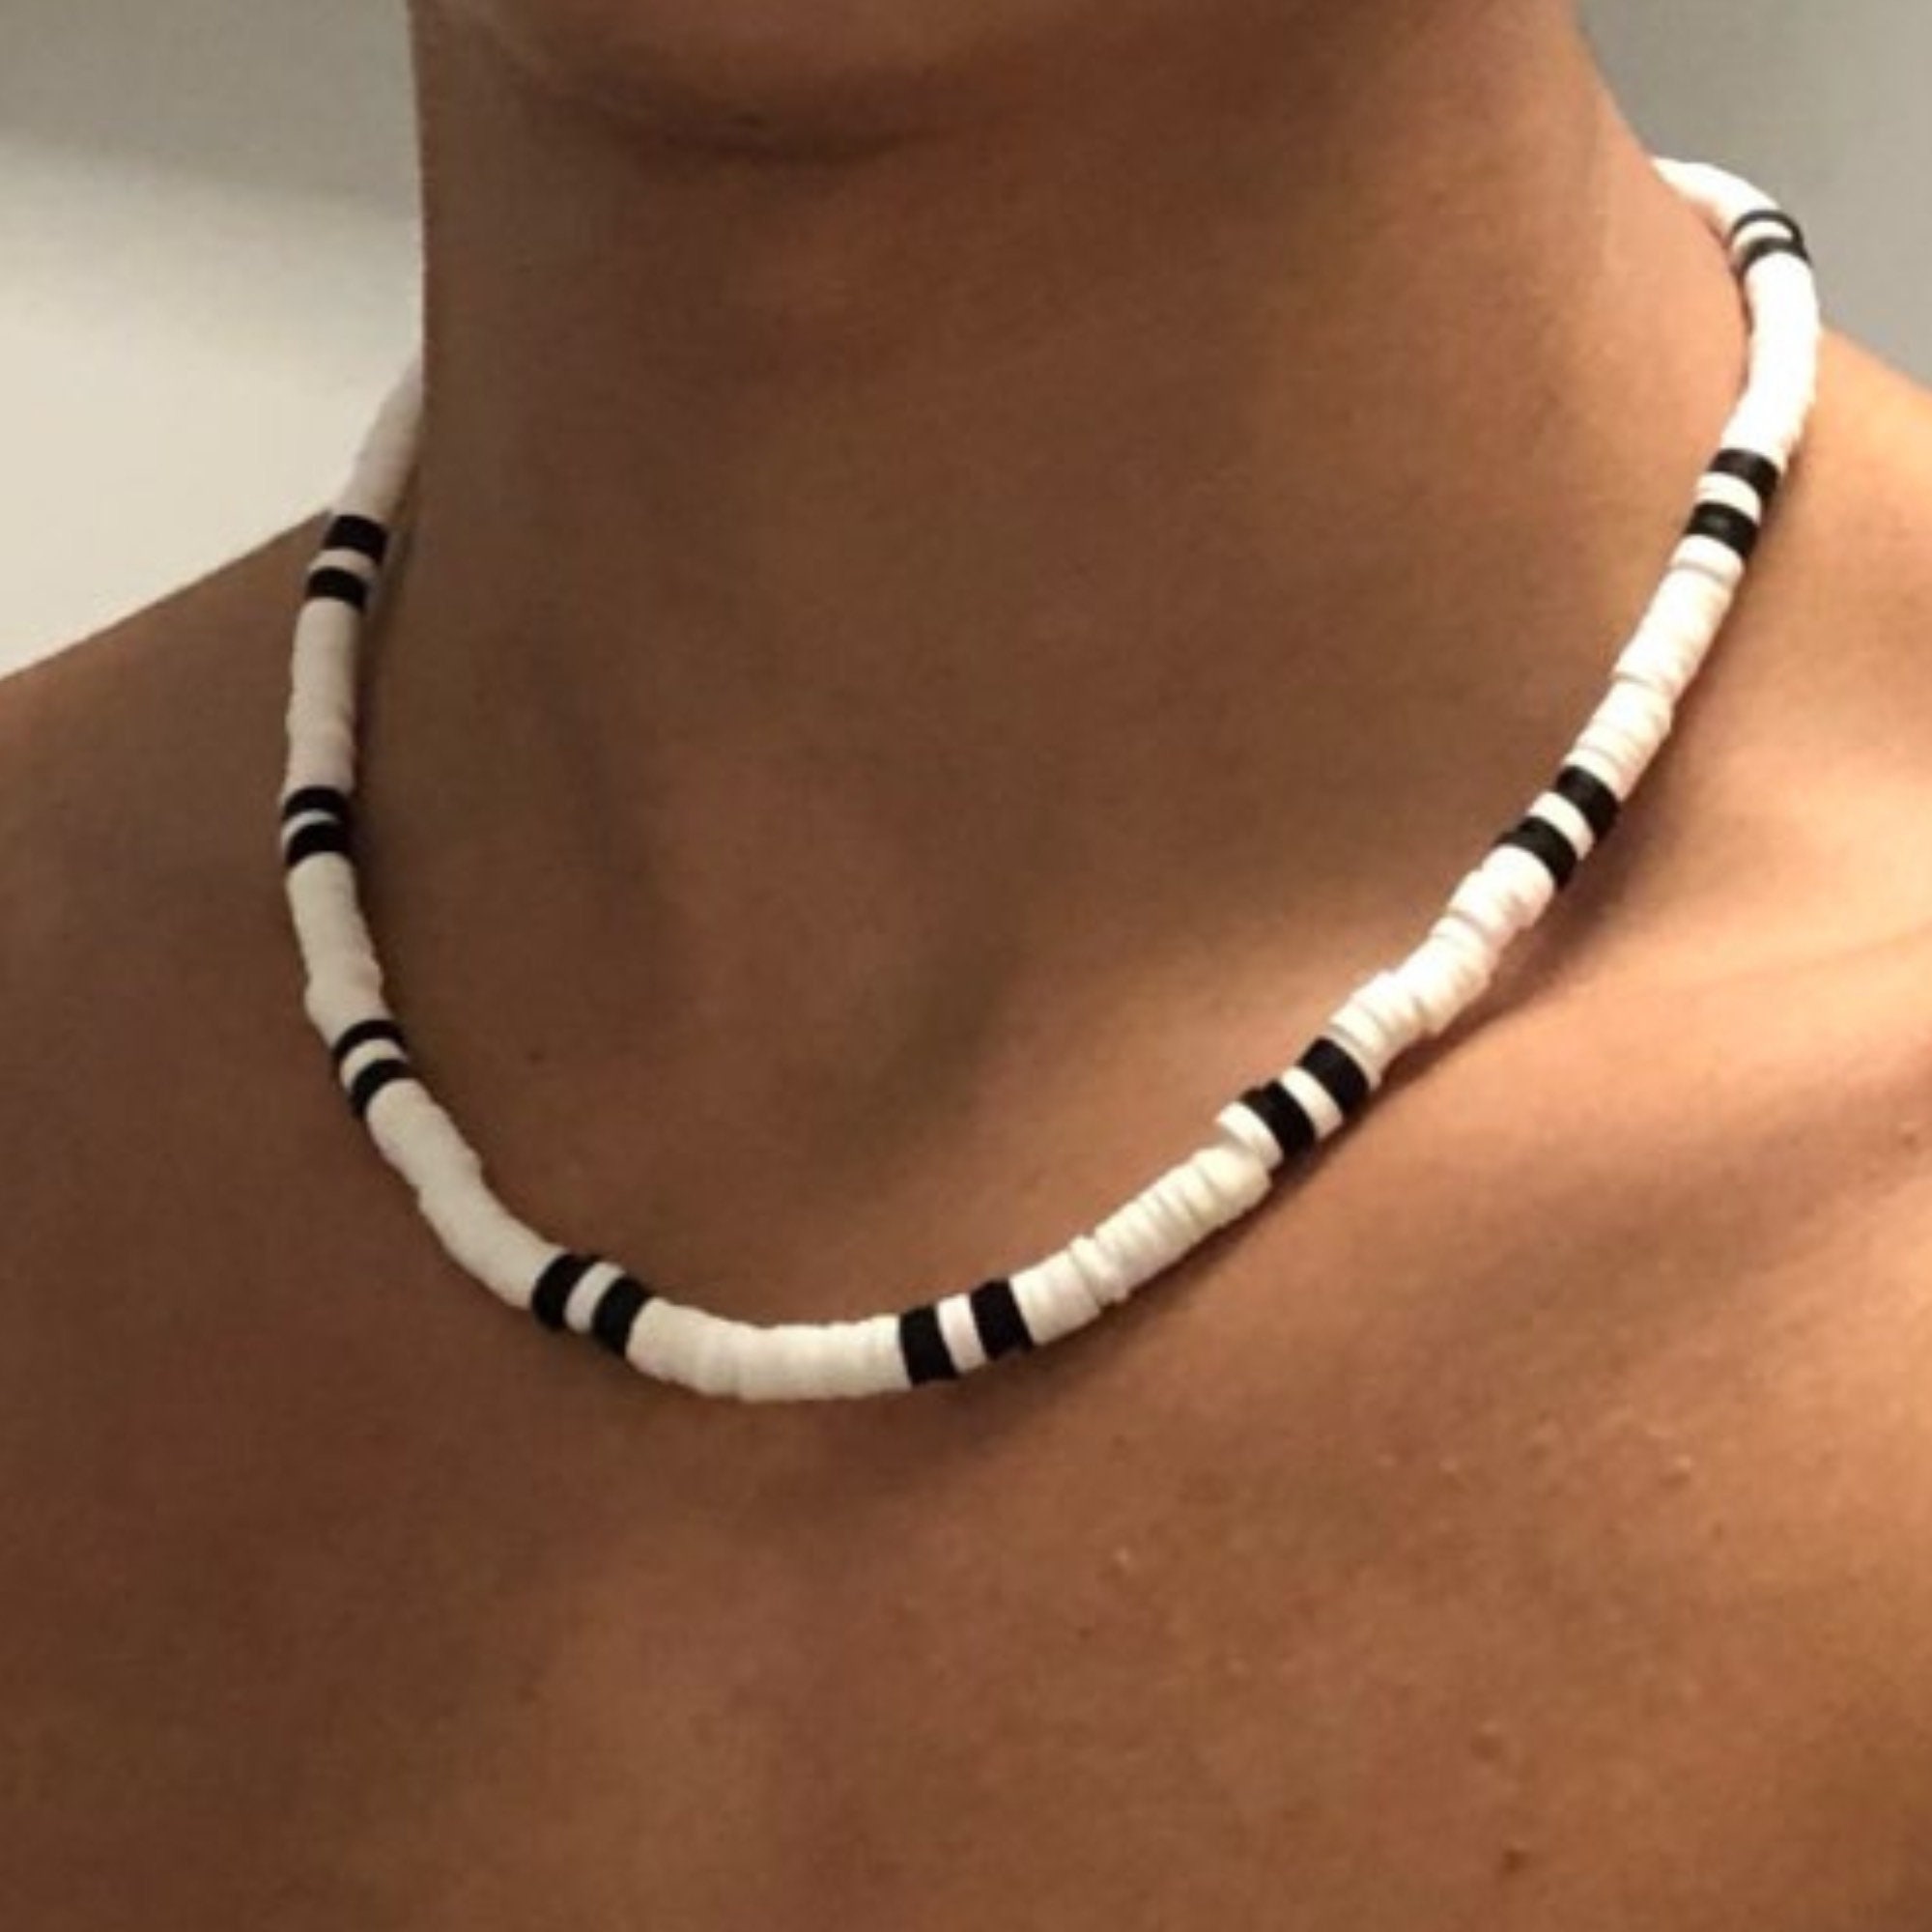 Buy the Mens White and Black Polymer Beaded Necklace